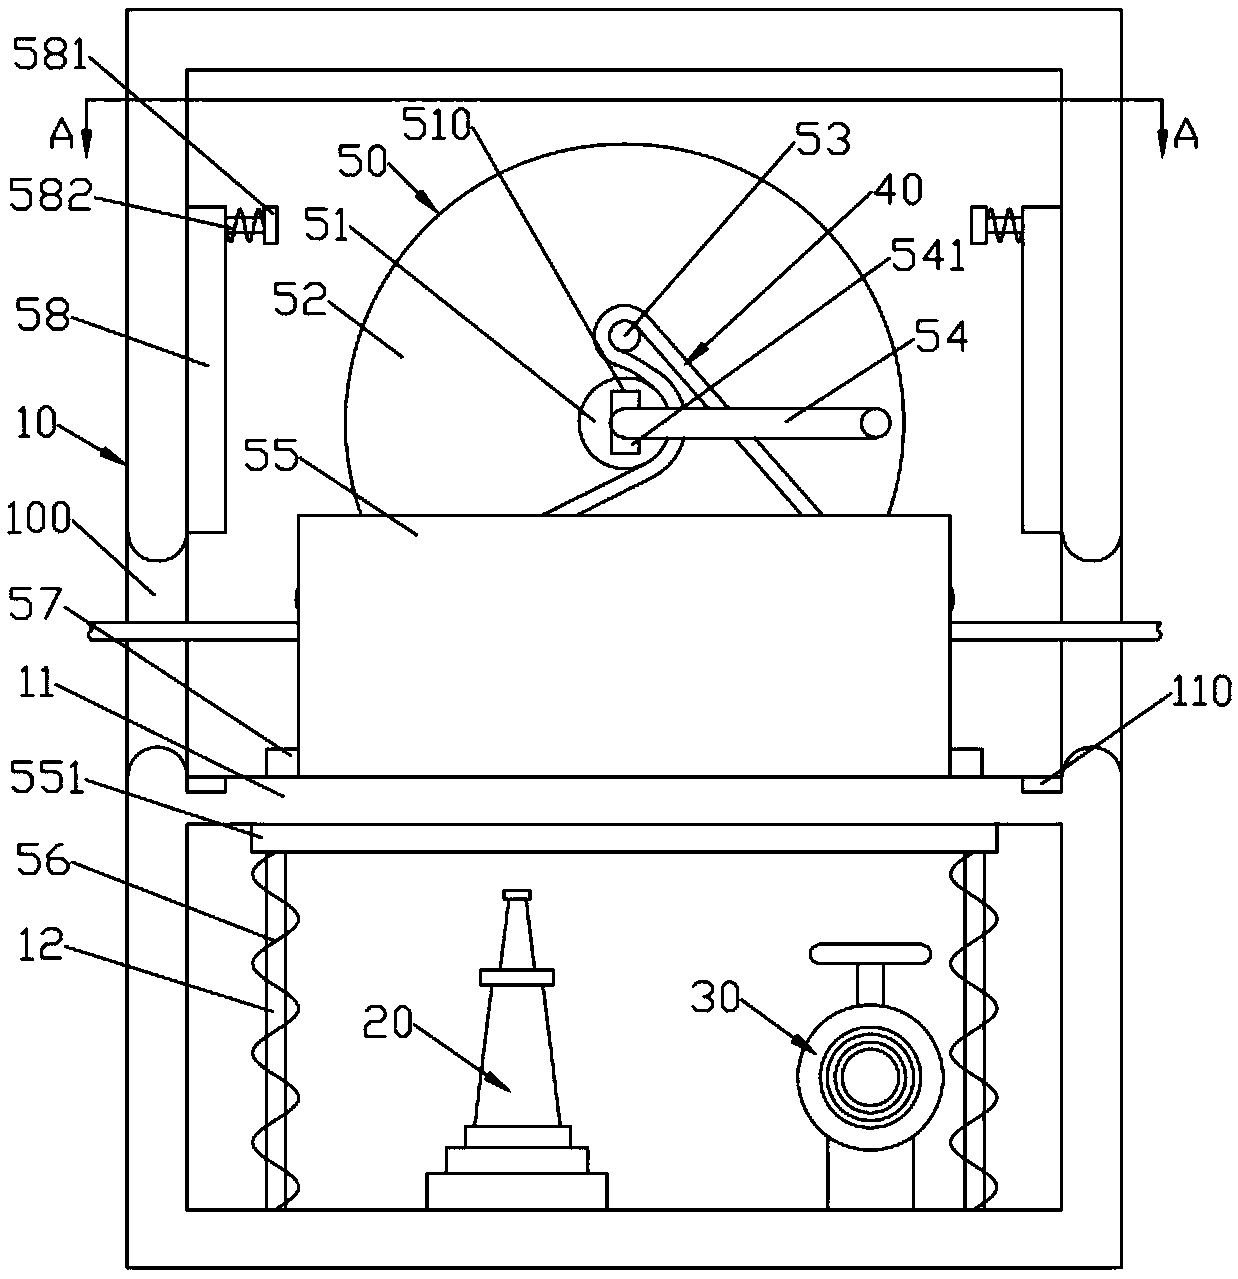 Fire-hydrant cabinet with hose transversely penetrating through cabinet body